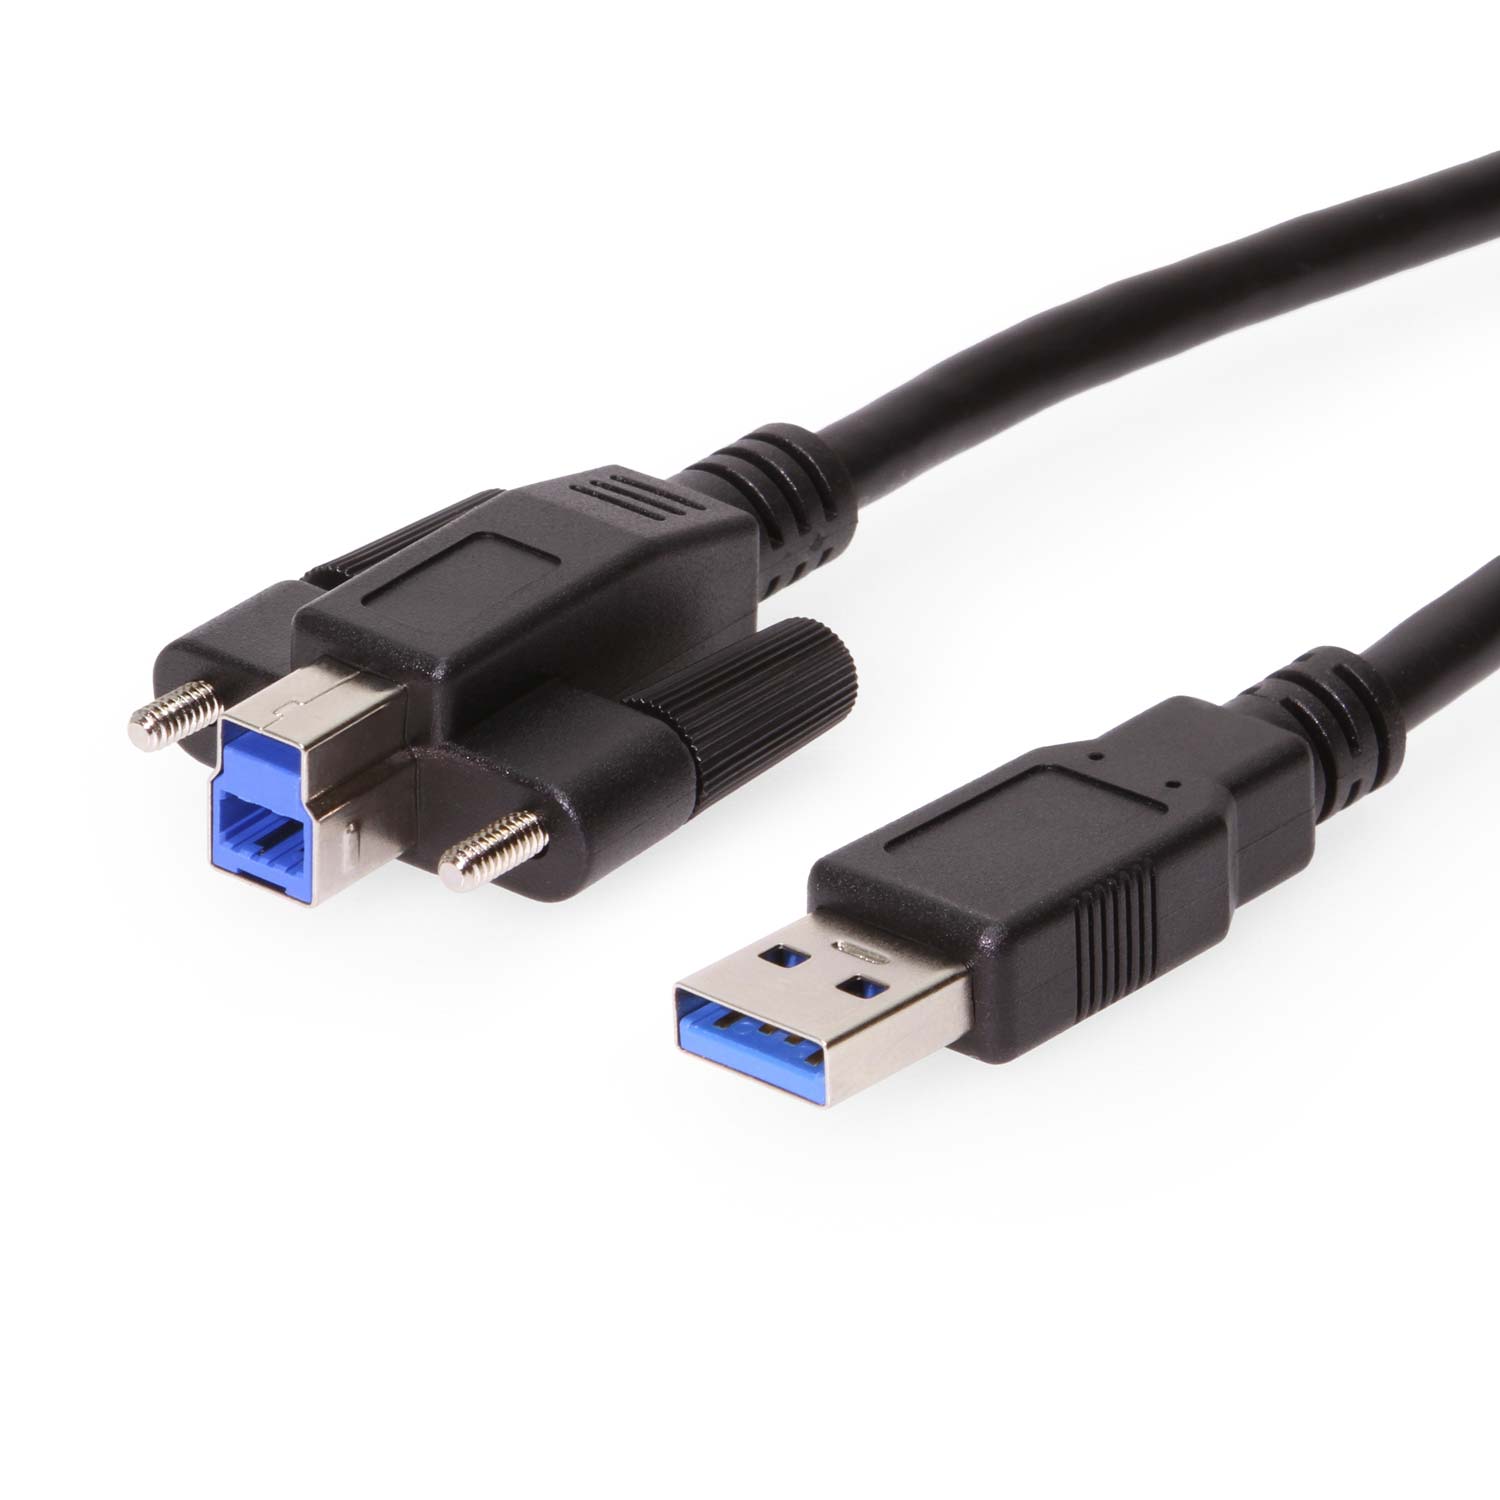 6ft USB 3.2 Gen 1 Type-A to Type-B SuperSpeed Cable